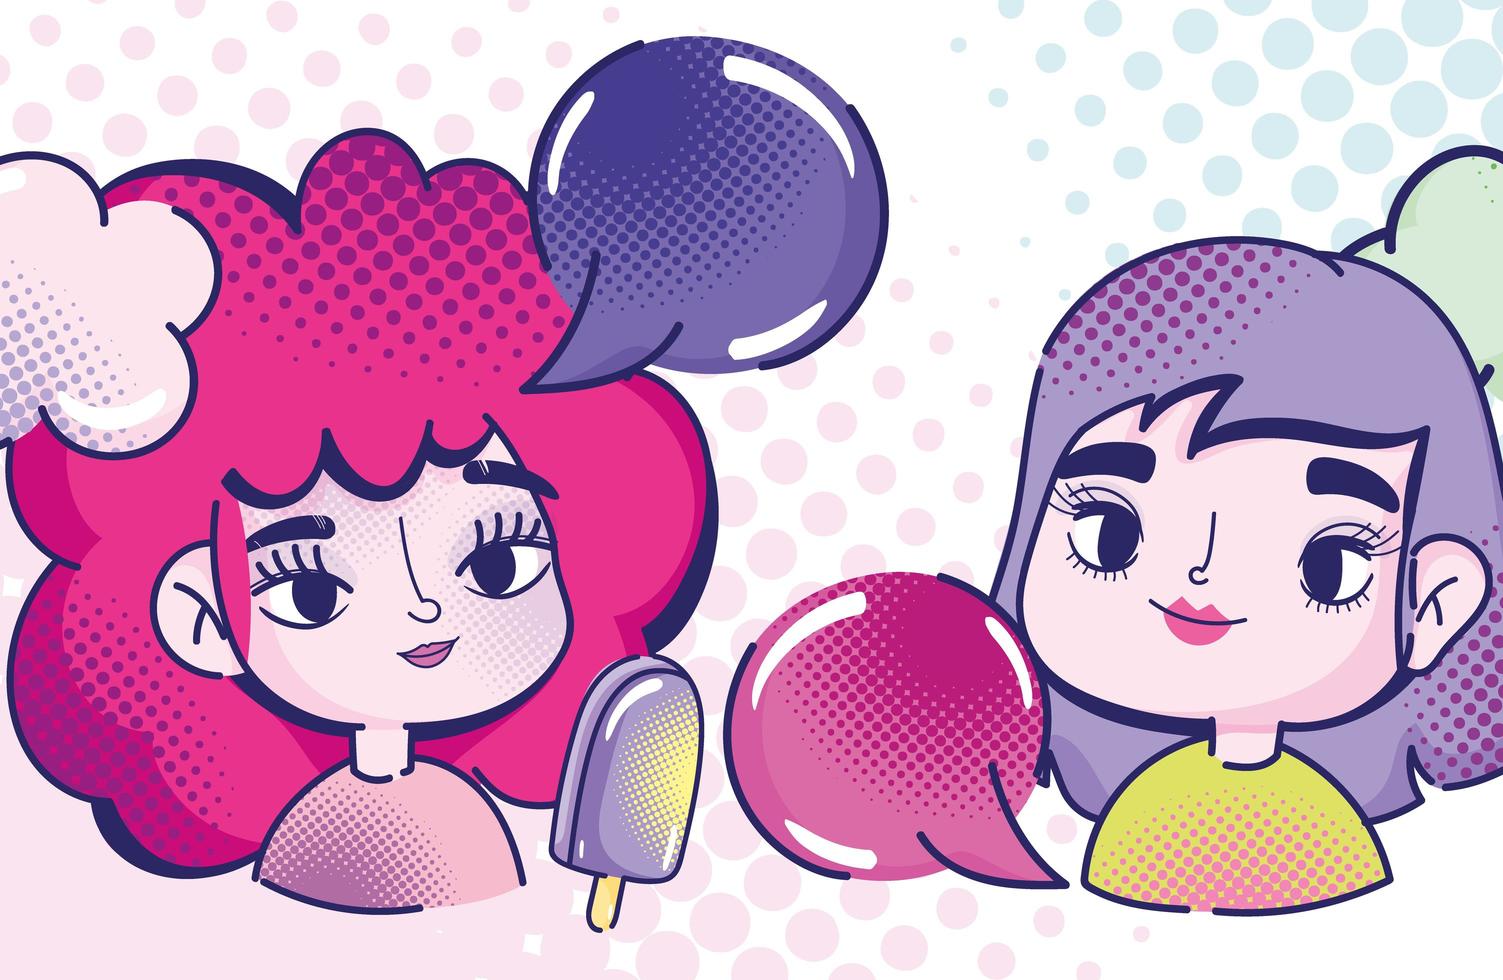 pop art cute girls with ice cream in stick talking bubbles halftone vector